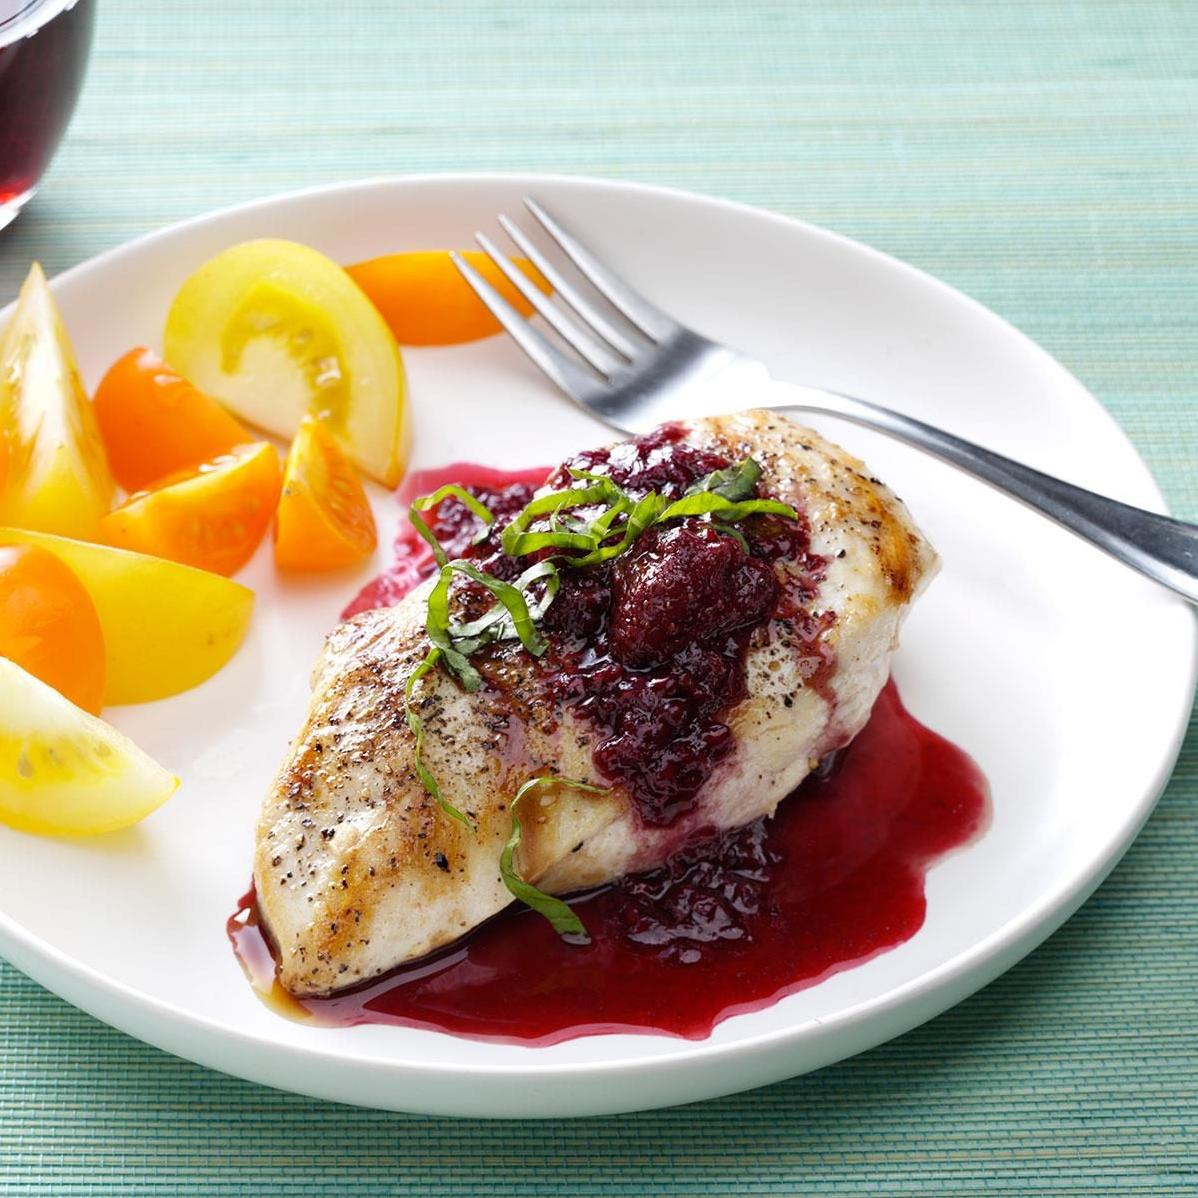  A scrumptious pairing of juicy chicken and tangy raspberries.